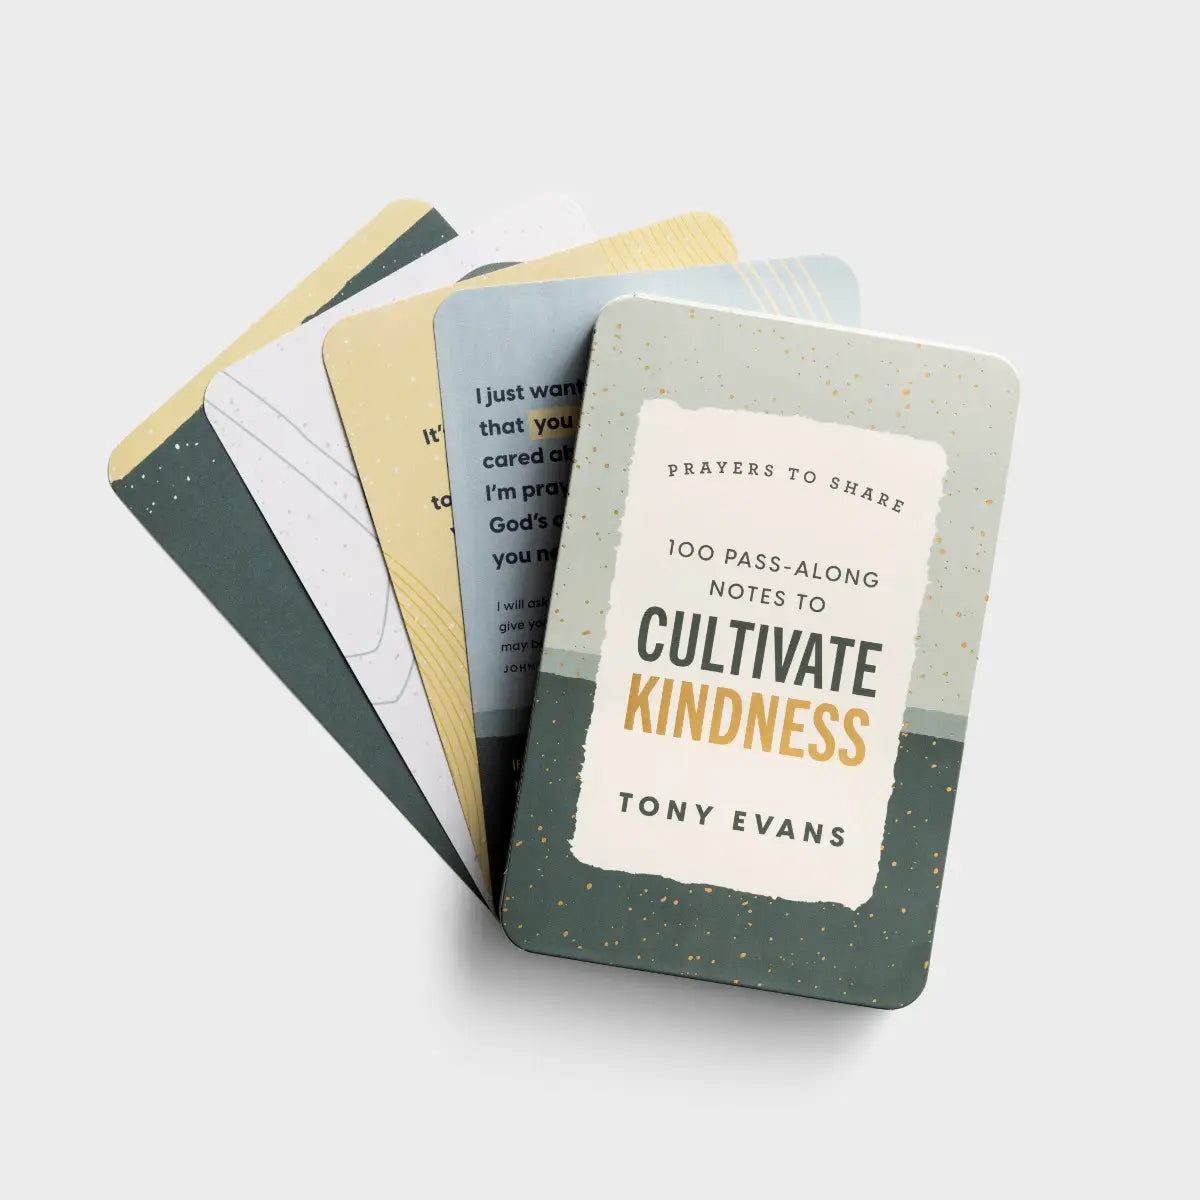 Prayers to Share: 100 Pass-Along Notes to Cultivate Kindness: Tony Evans